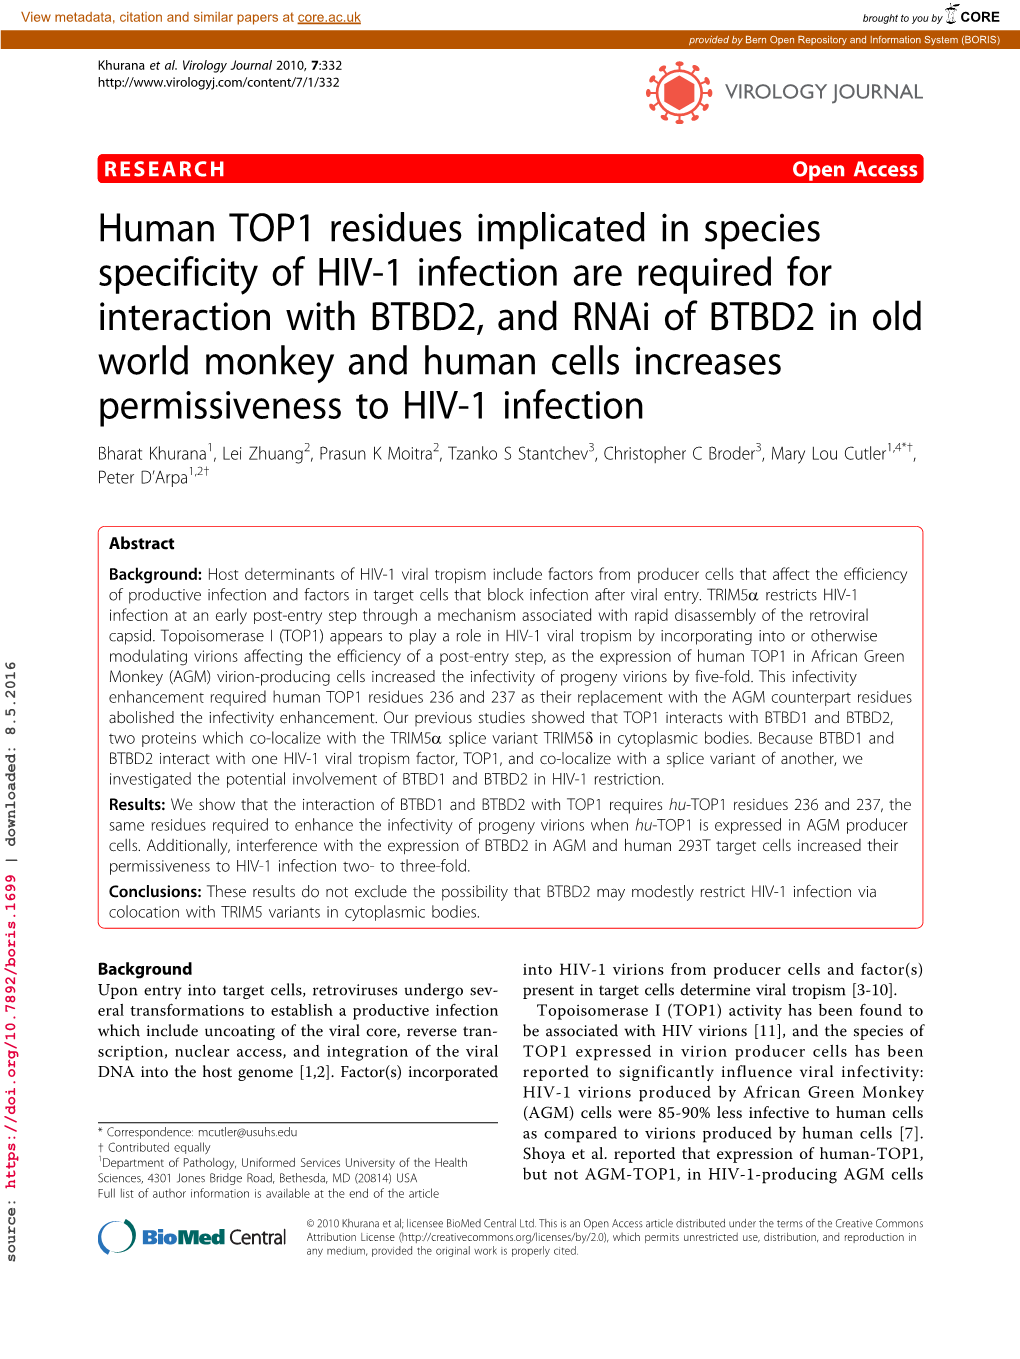 Human TOP1 Residues Implicated in Species Specificity Of